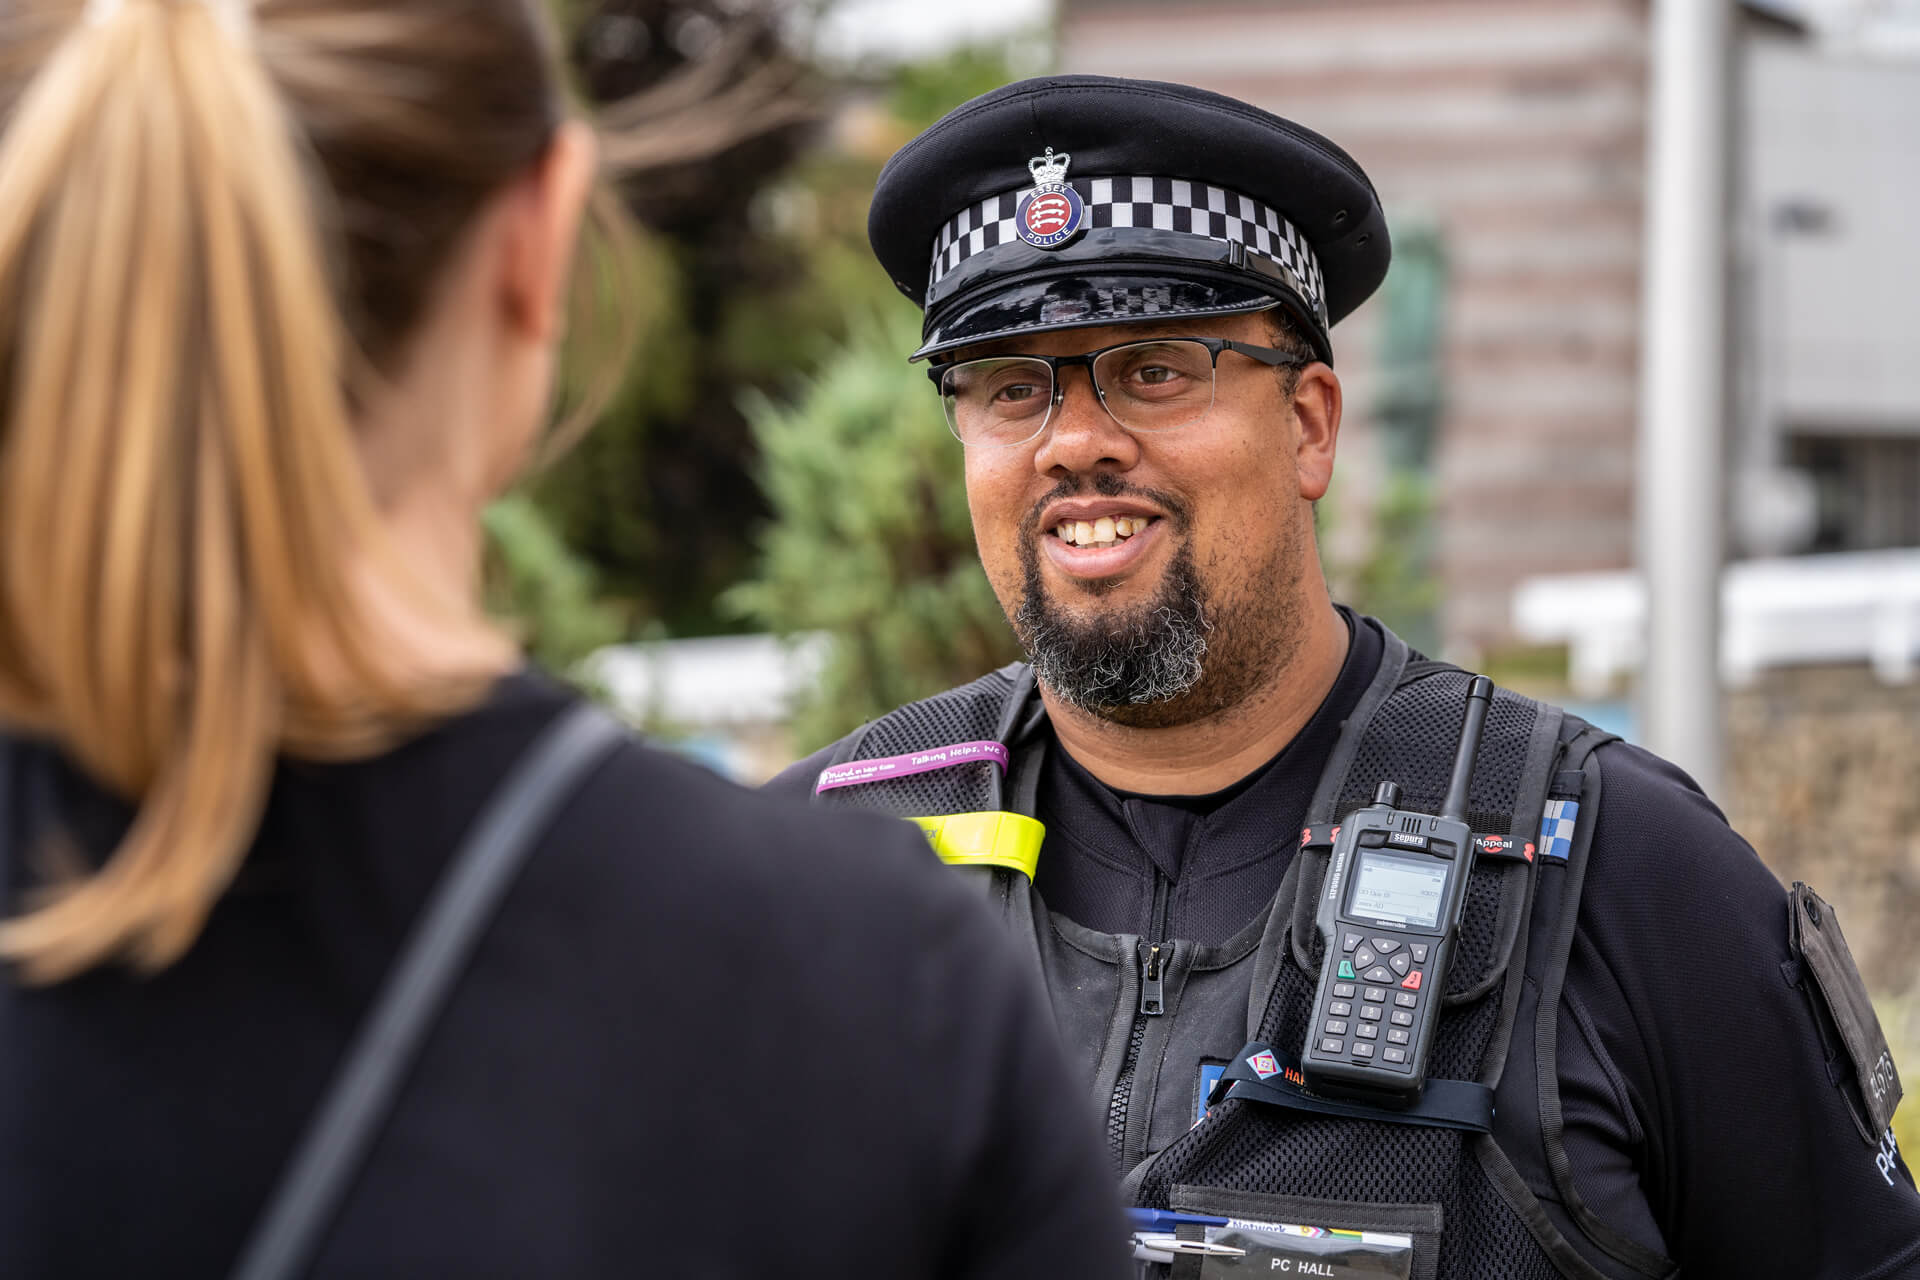 Essex police officer talking to a member of the public. 